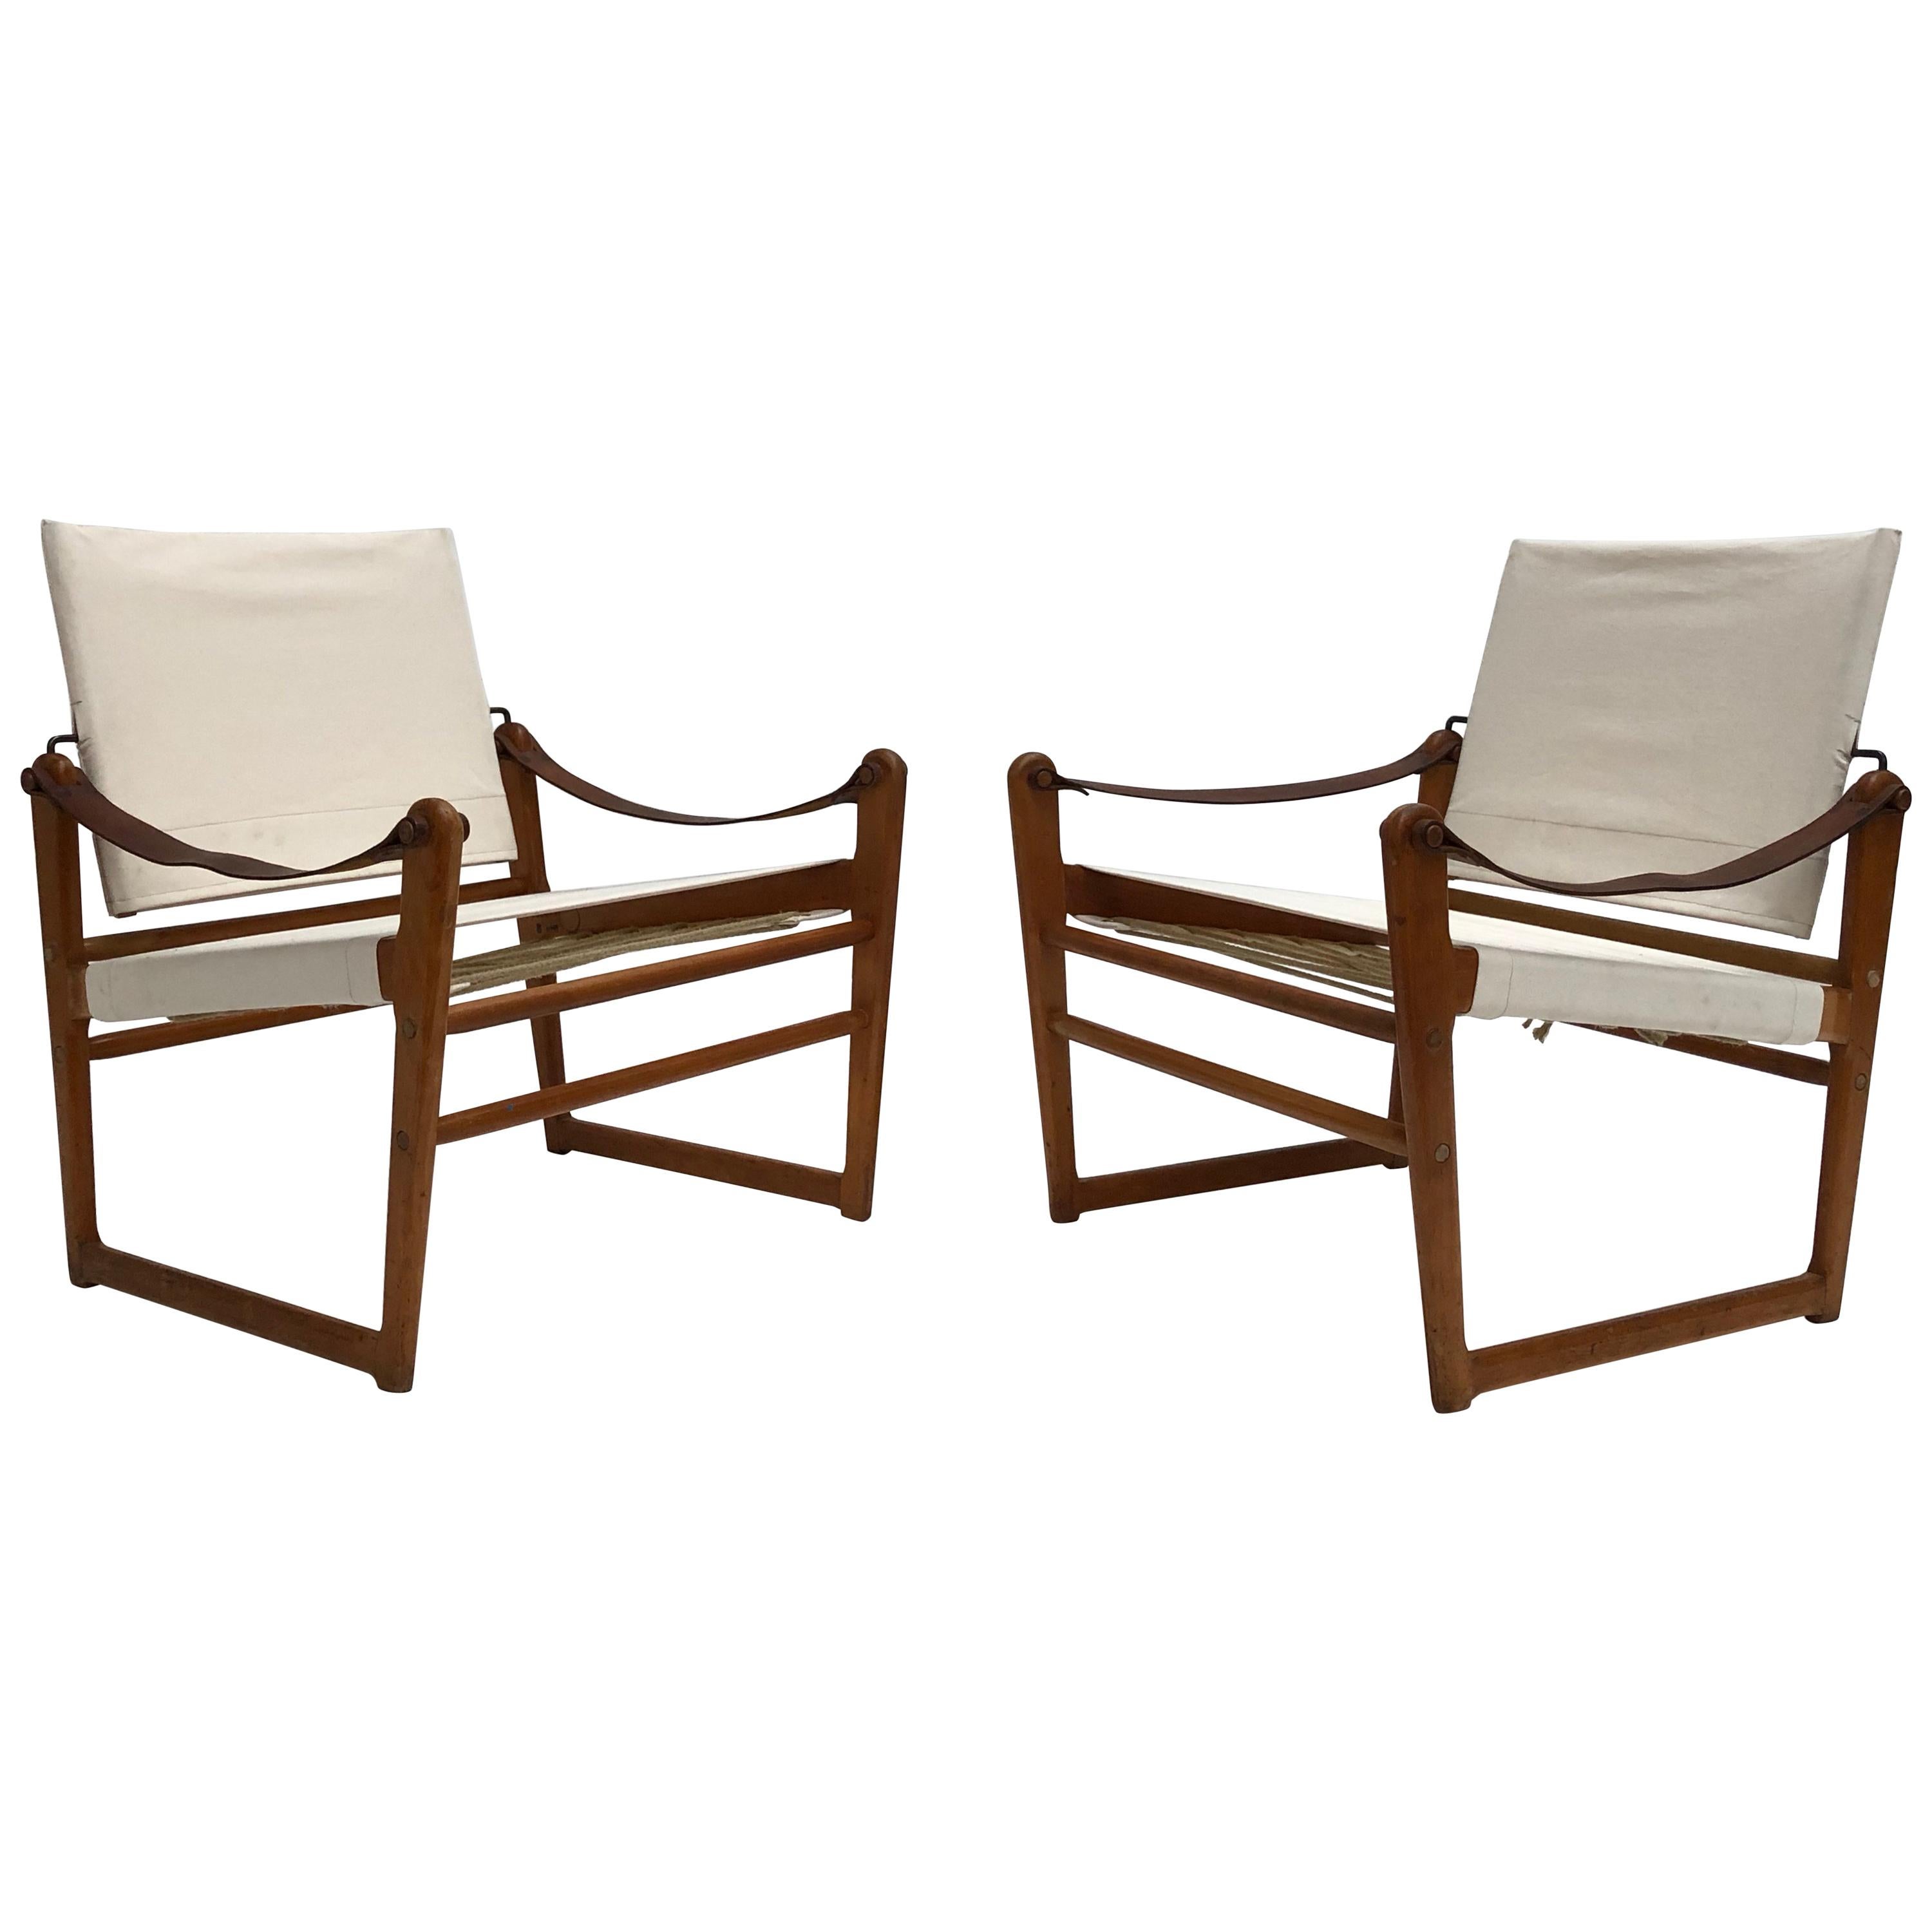 Restored 1950s Pair of "Cikada" Lounge Chairs by Bengt Ruda for Ikea, Sweden